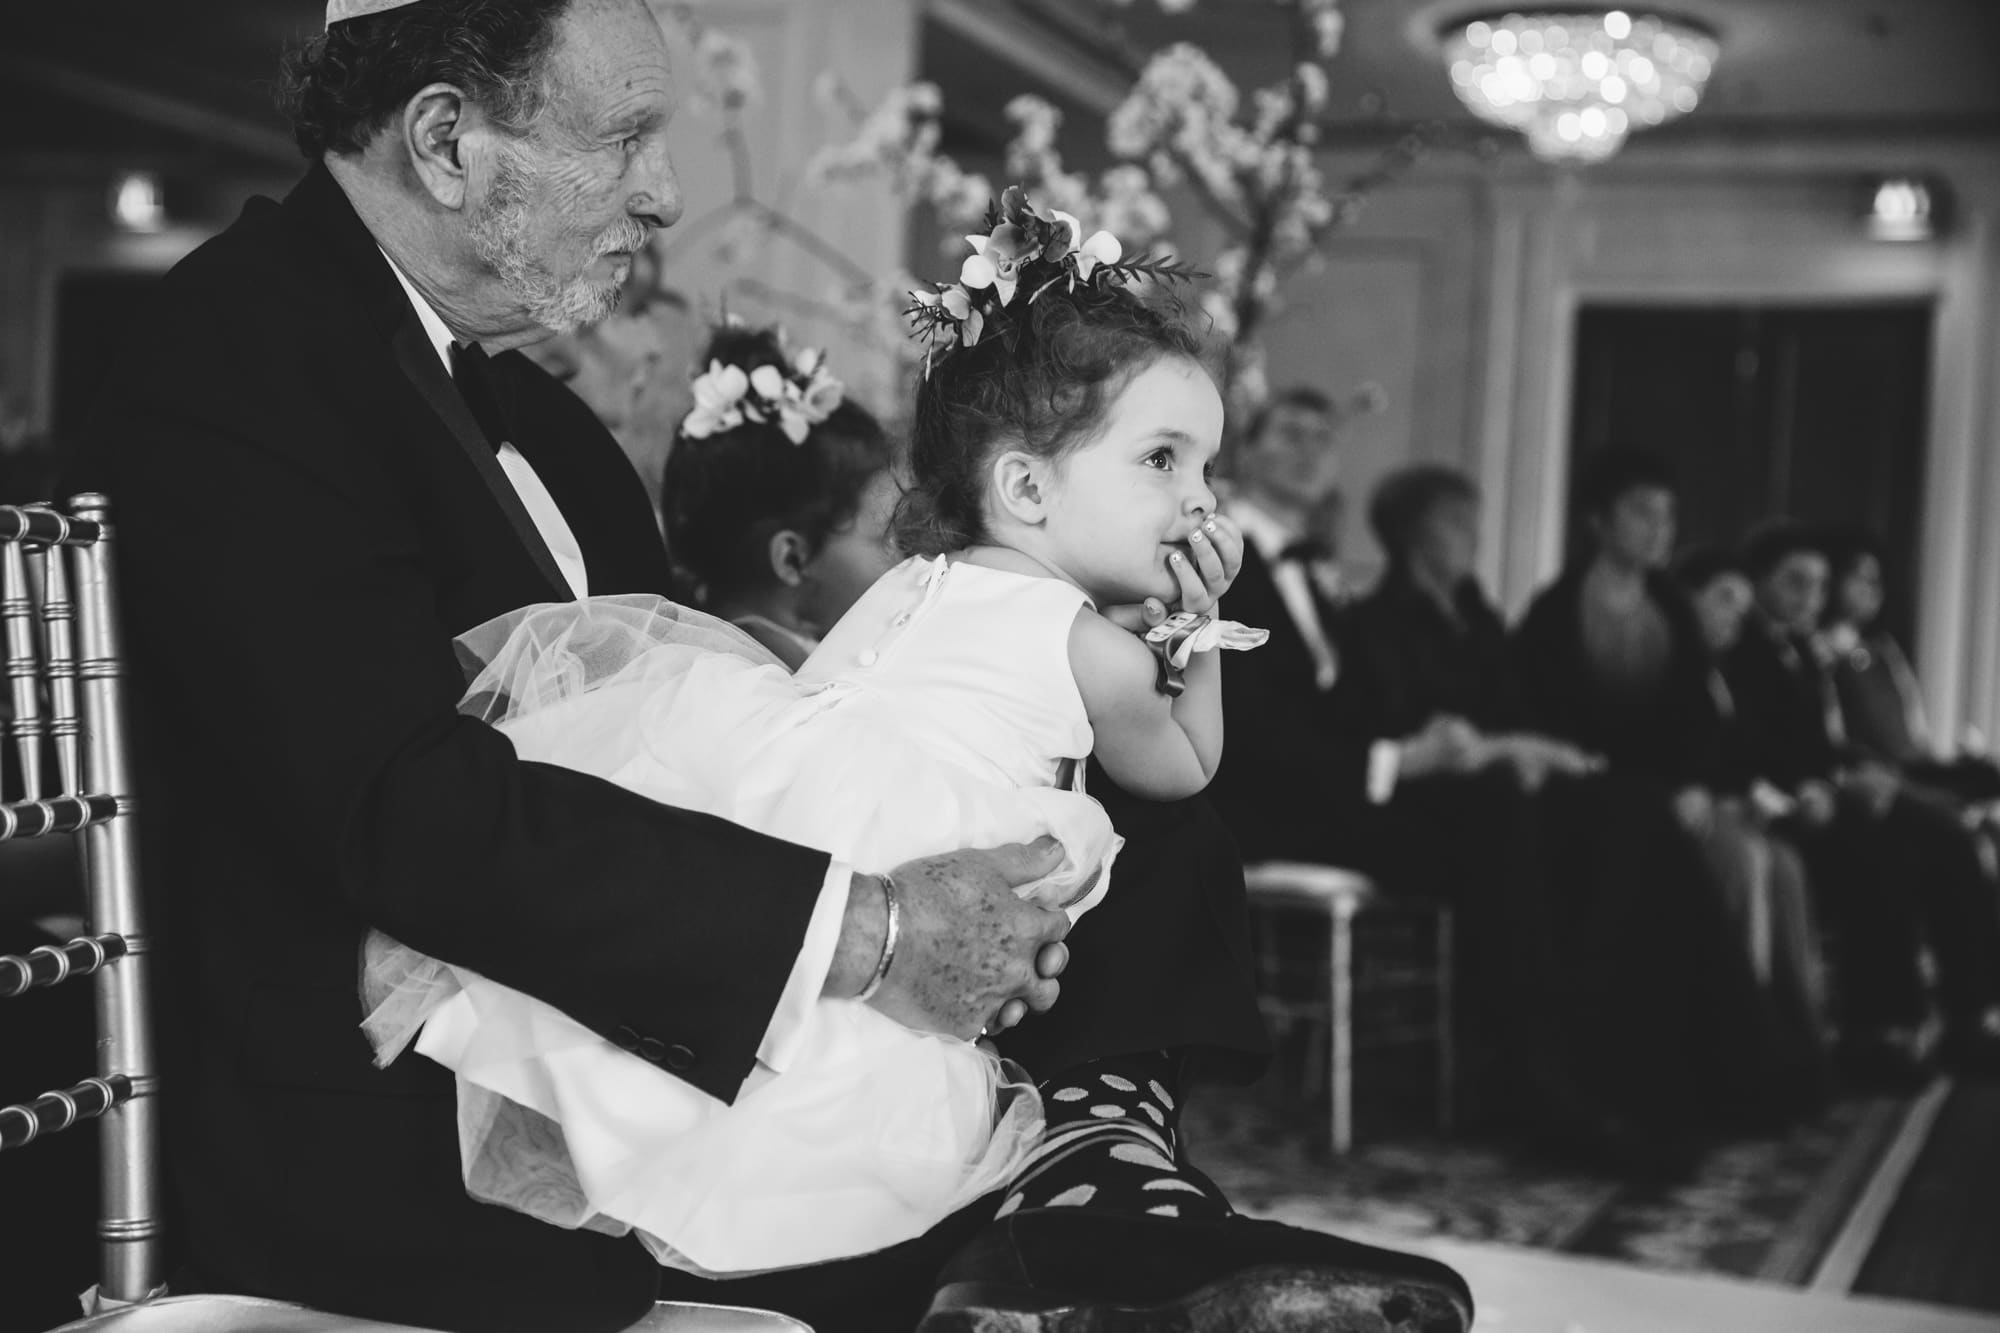 This documentary photograph of a flower girl watching a wedding ceremony is one of the best wedding photographs of 2016